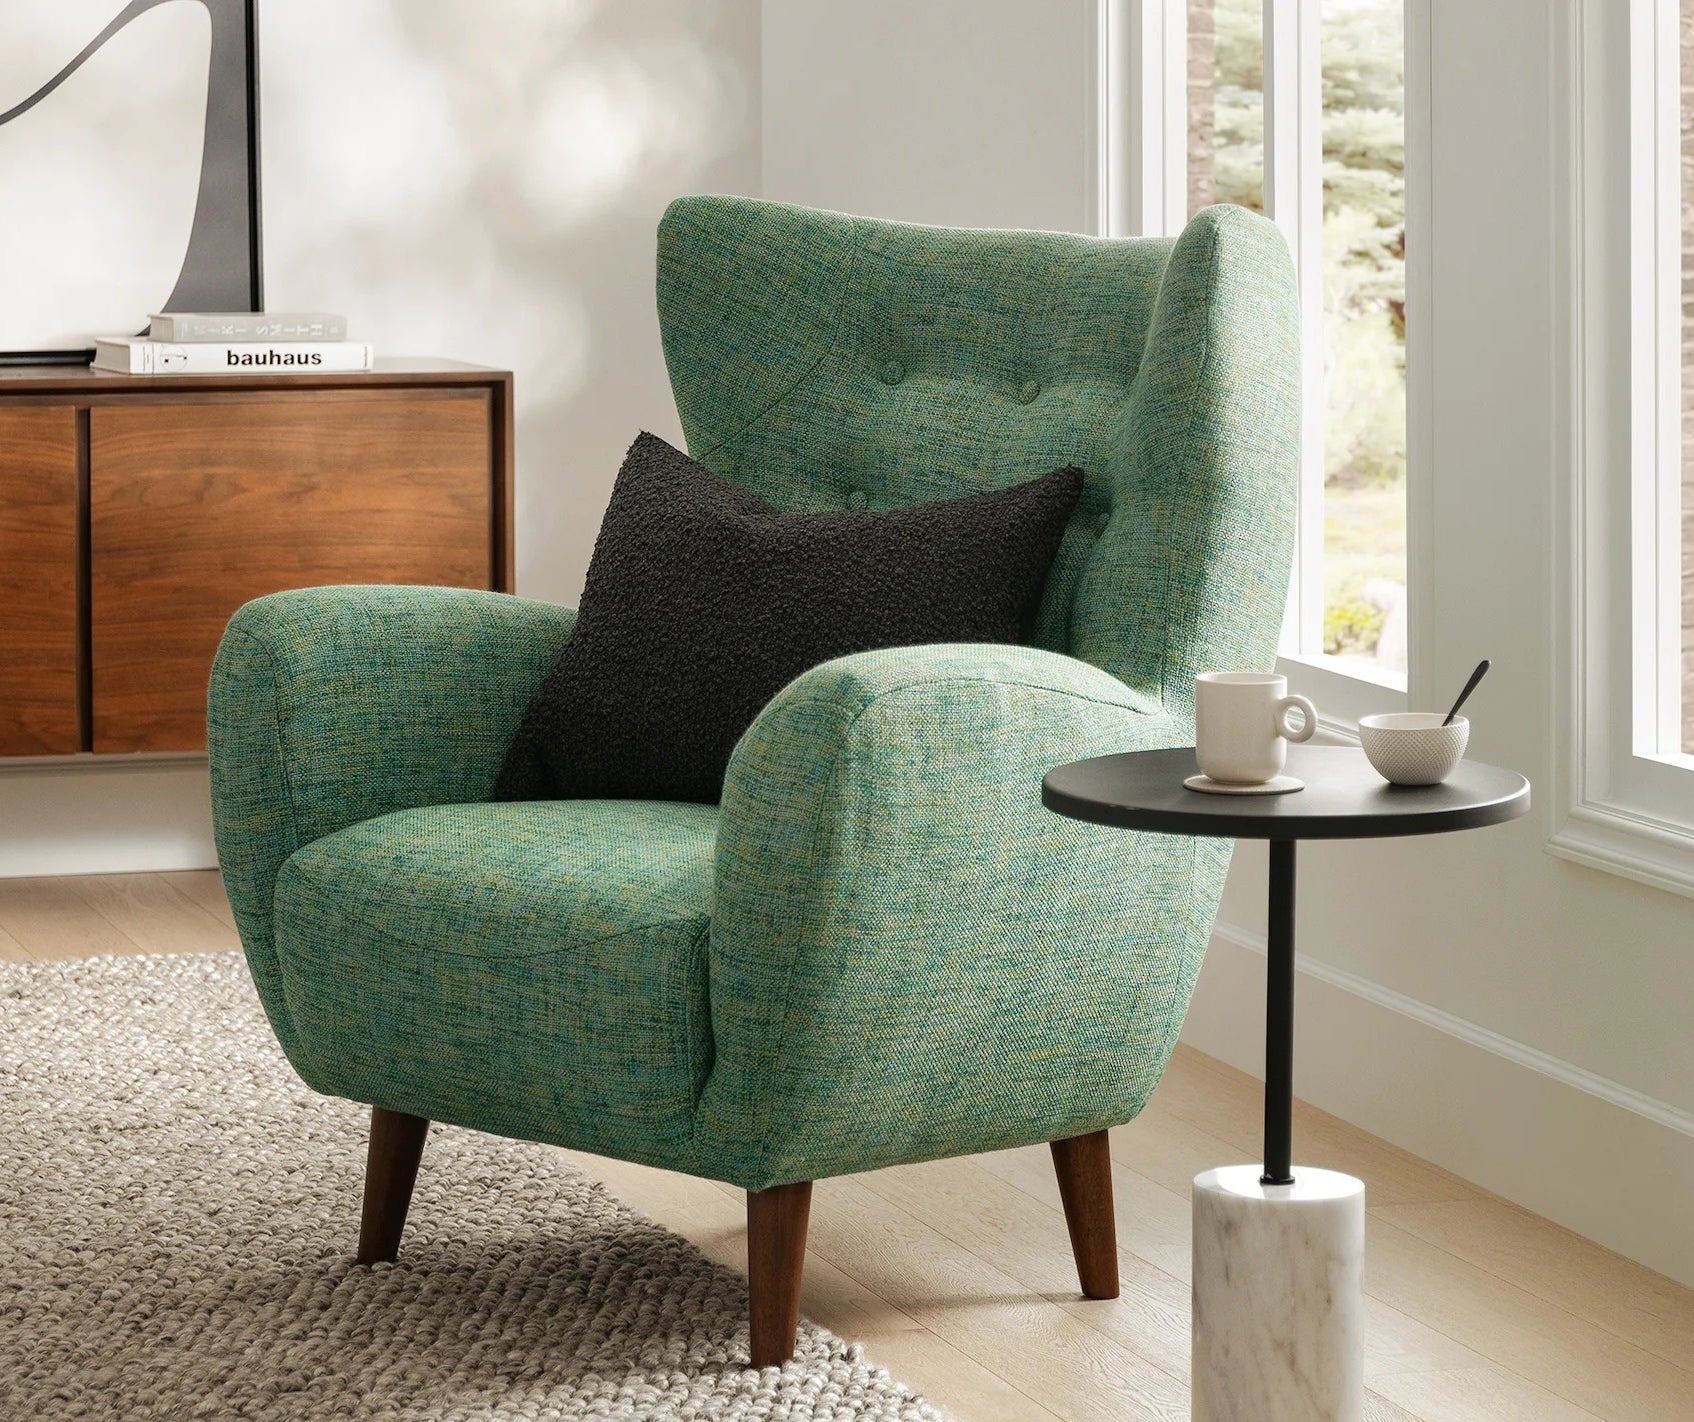 Textured armchair with a side table displaying a tea set in a well-lit, cozy room setup